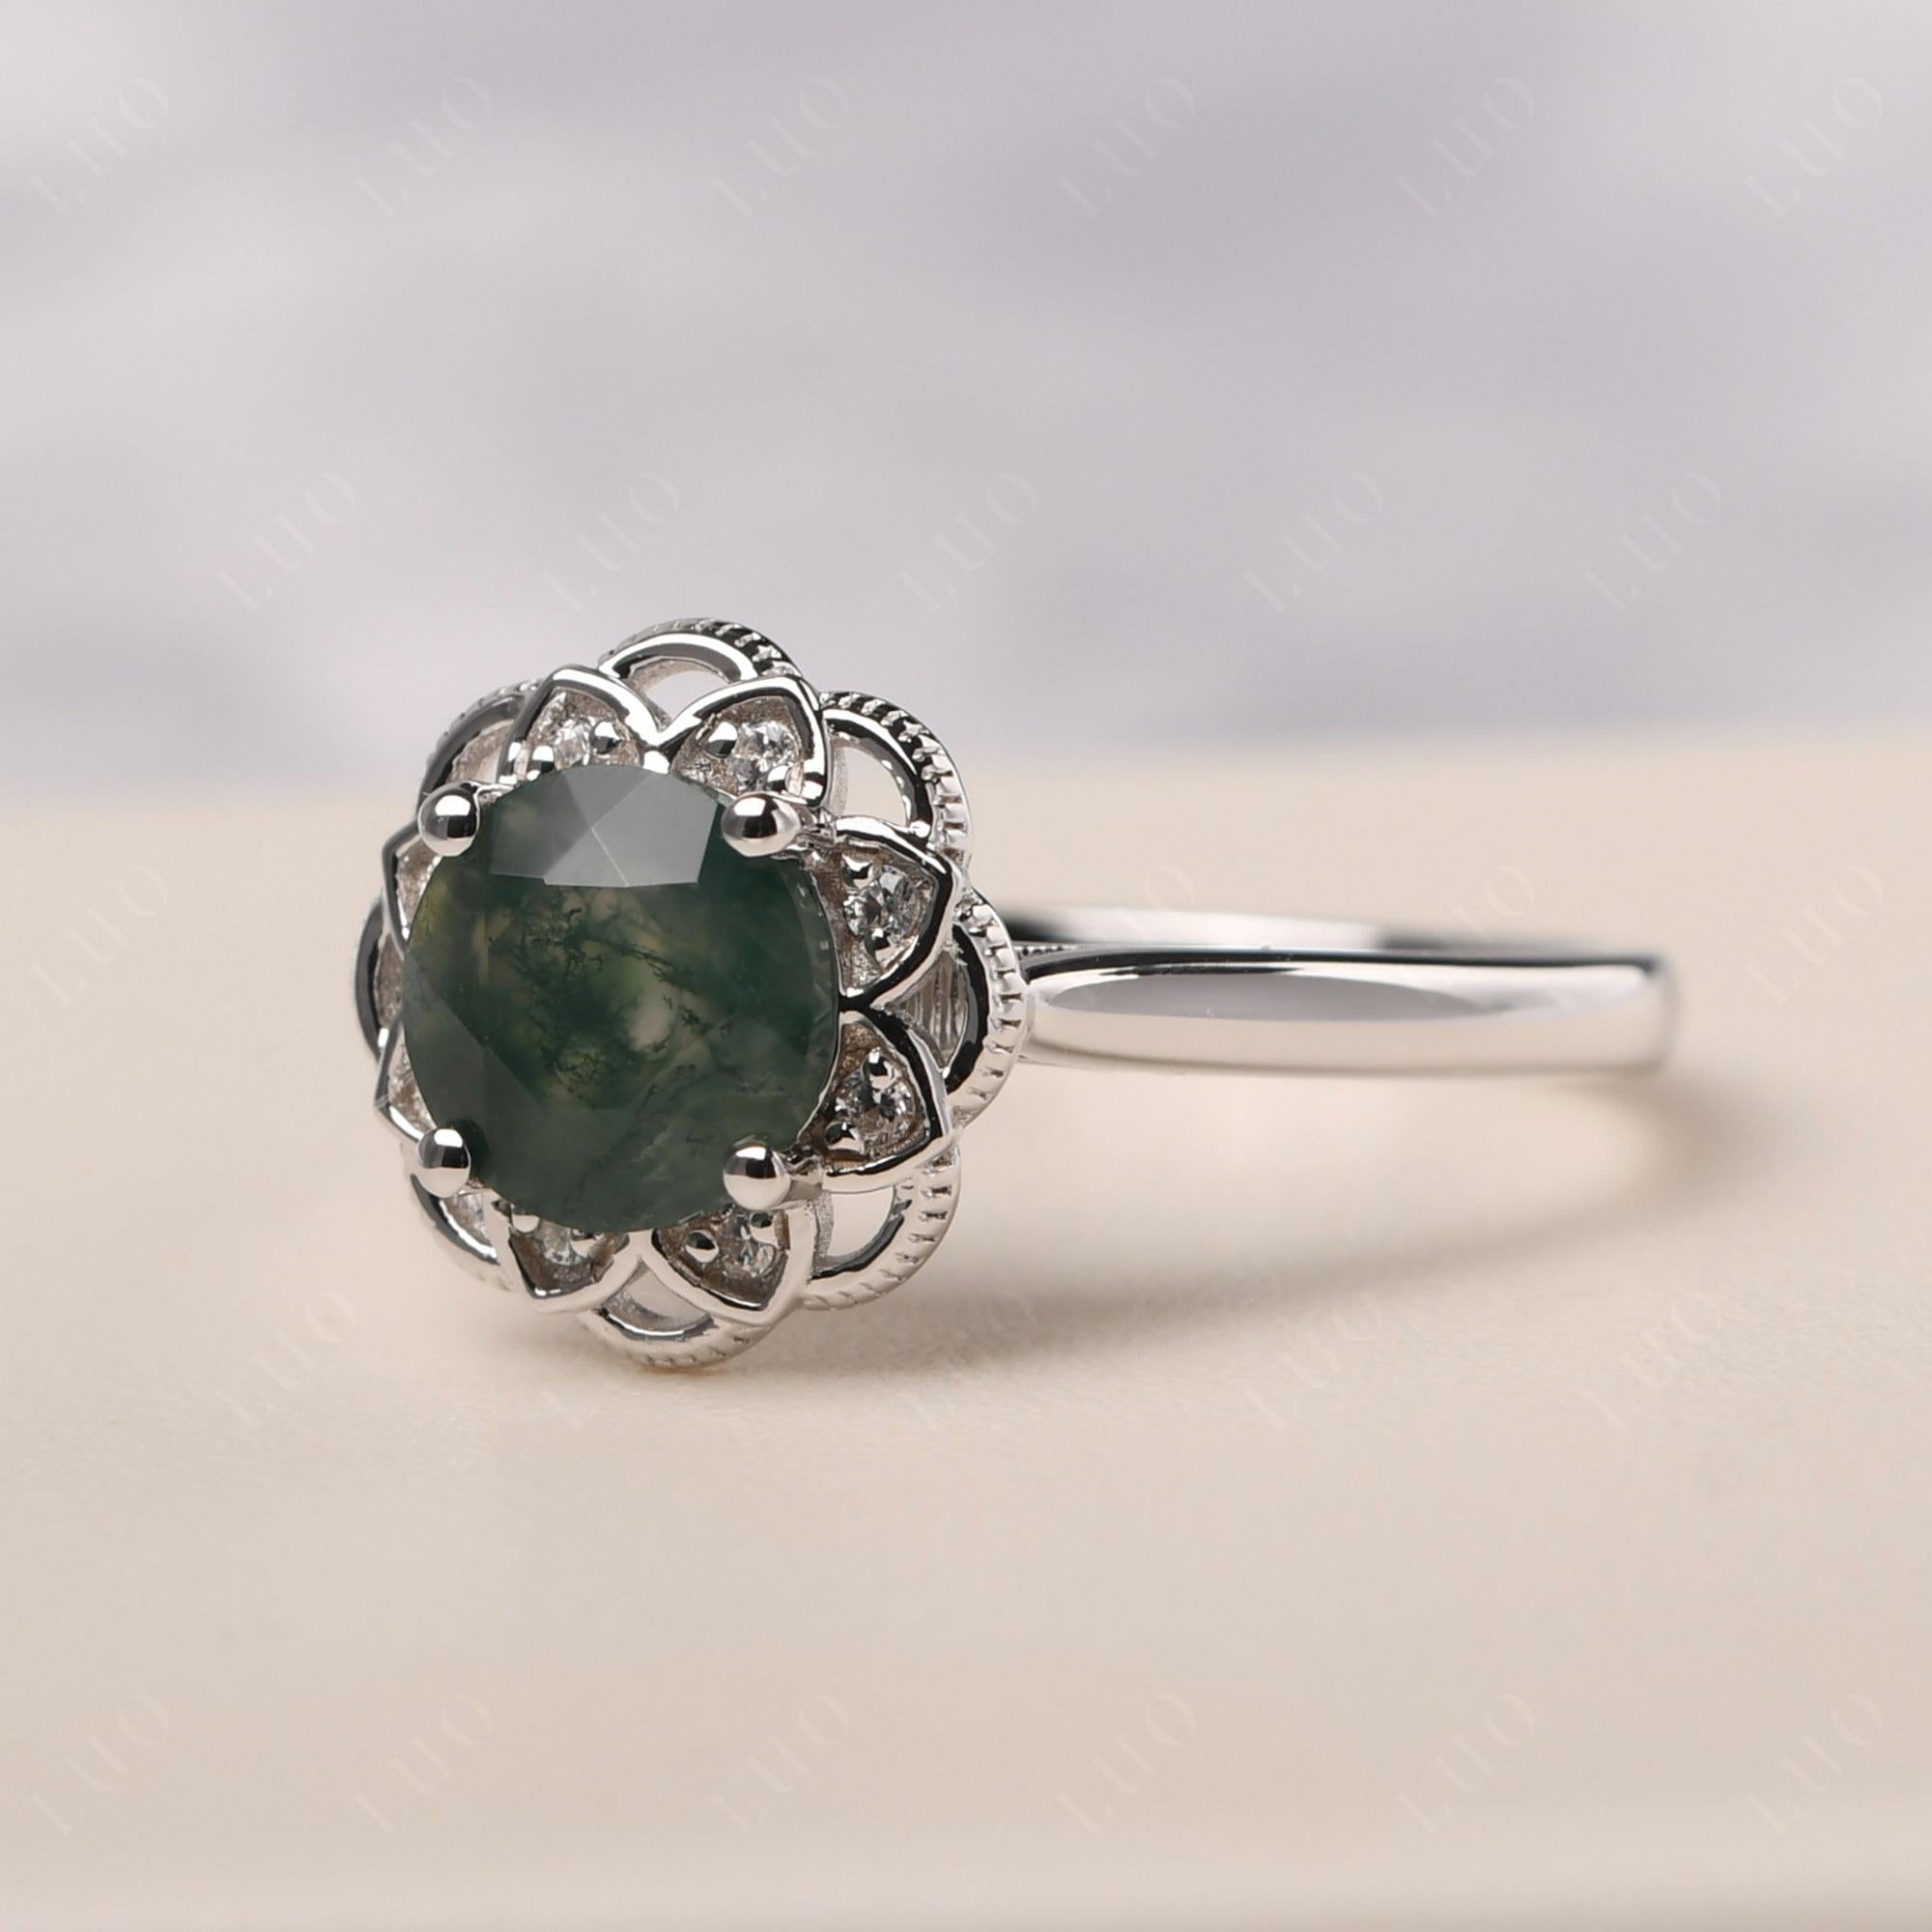 Moss Agate Vintage Inspired Filigree Ring - LUO Jewelry